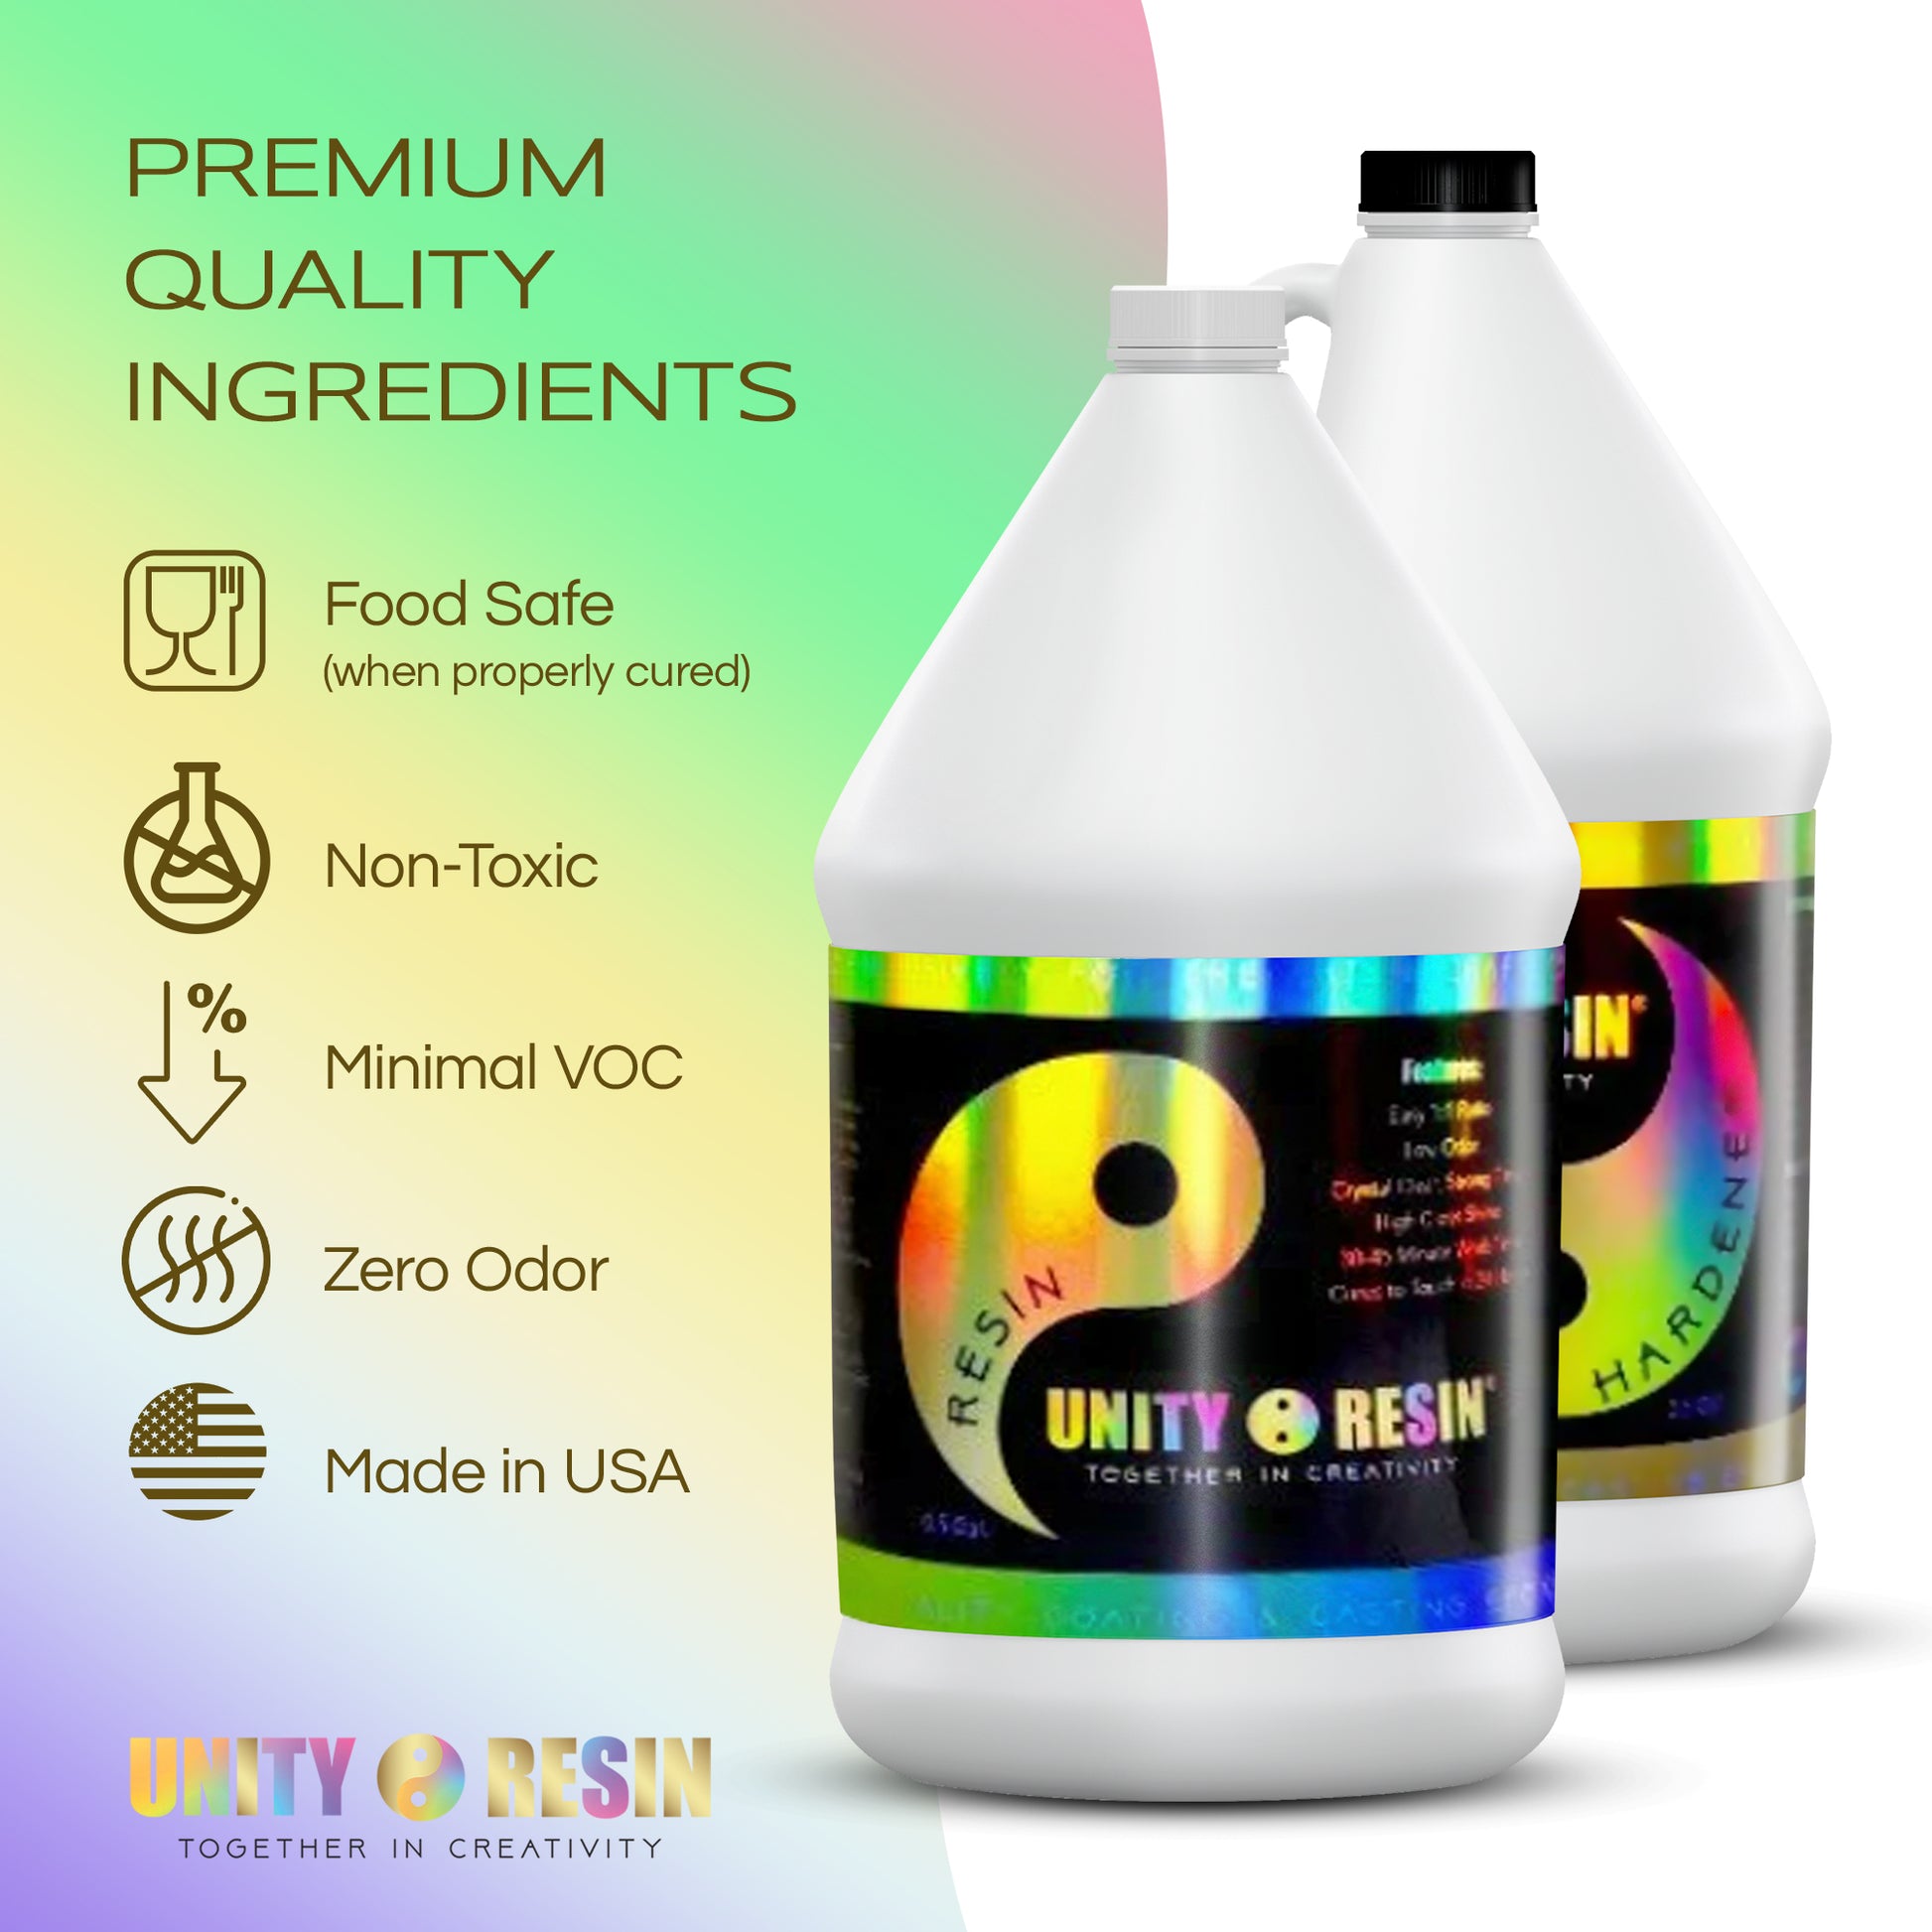 Epoxy Resin, 2 Gallon Epoxy Resin Supplies,Bubble Free & Crystal Clear  Casting R